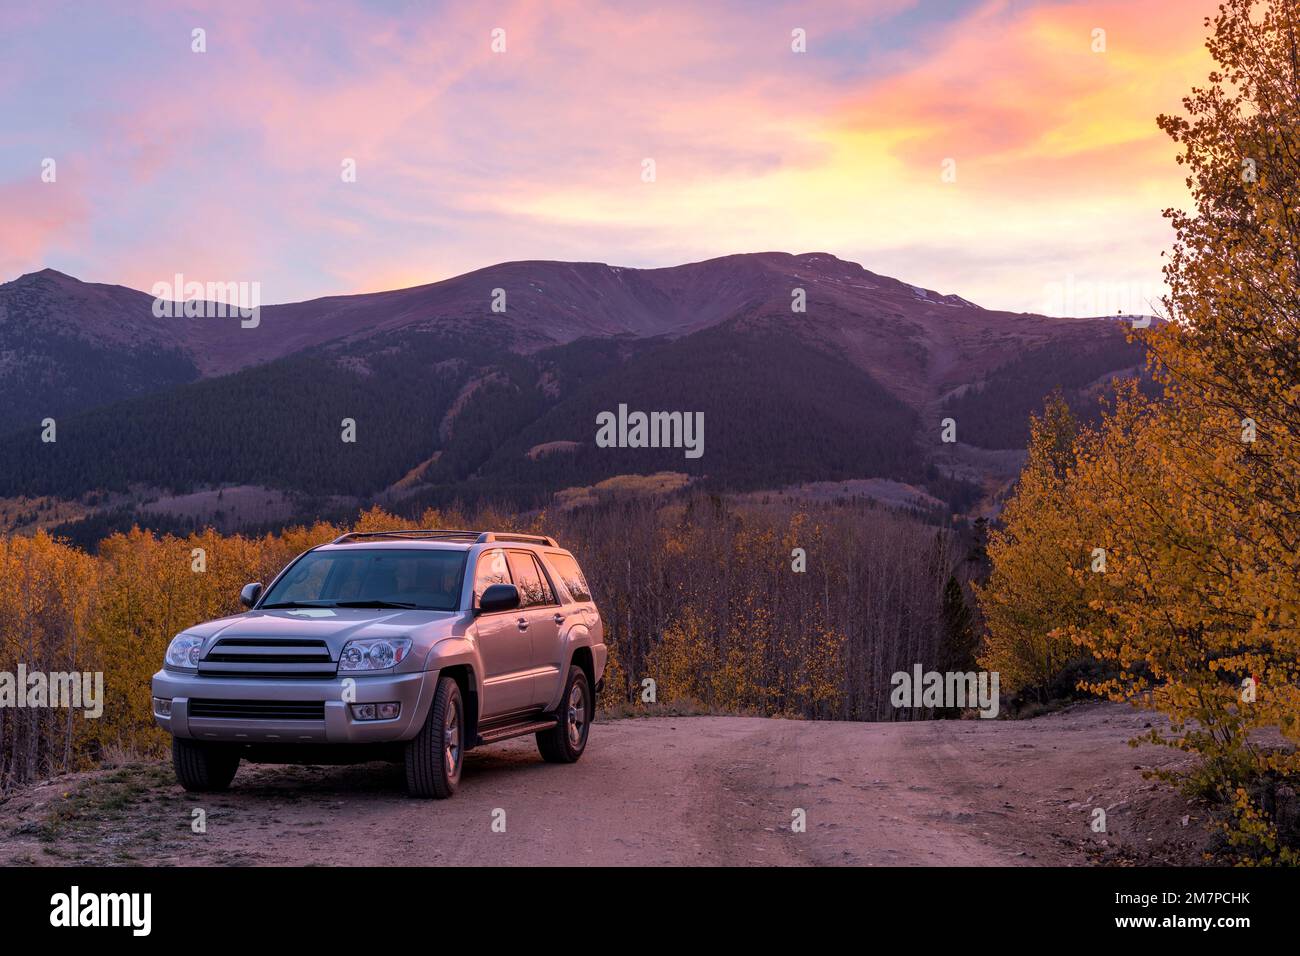 Exploring Autumn Sunset Valley - A SUV on a dirt backcountry road in a valley at base of Mount Elbert on a colorful Autumn evening. Twin Lakes, CO, US. Stock Photo